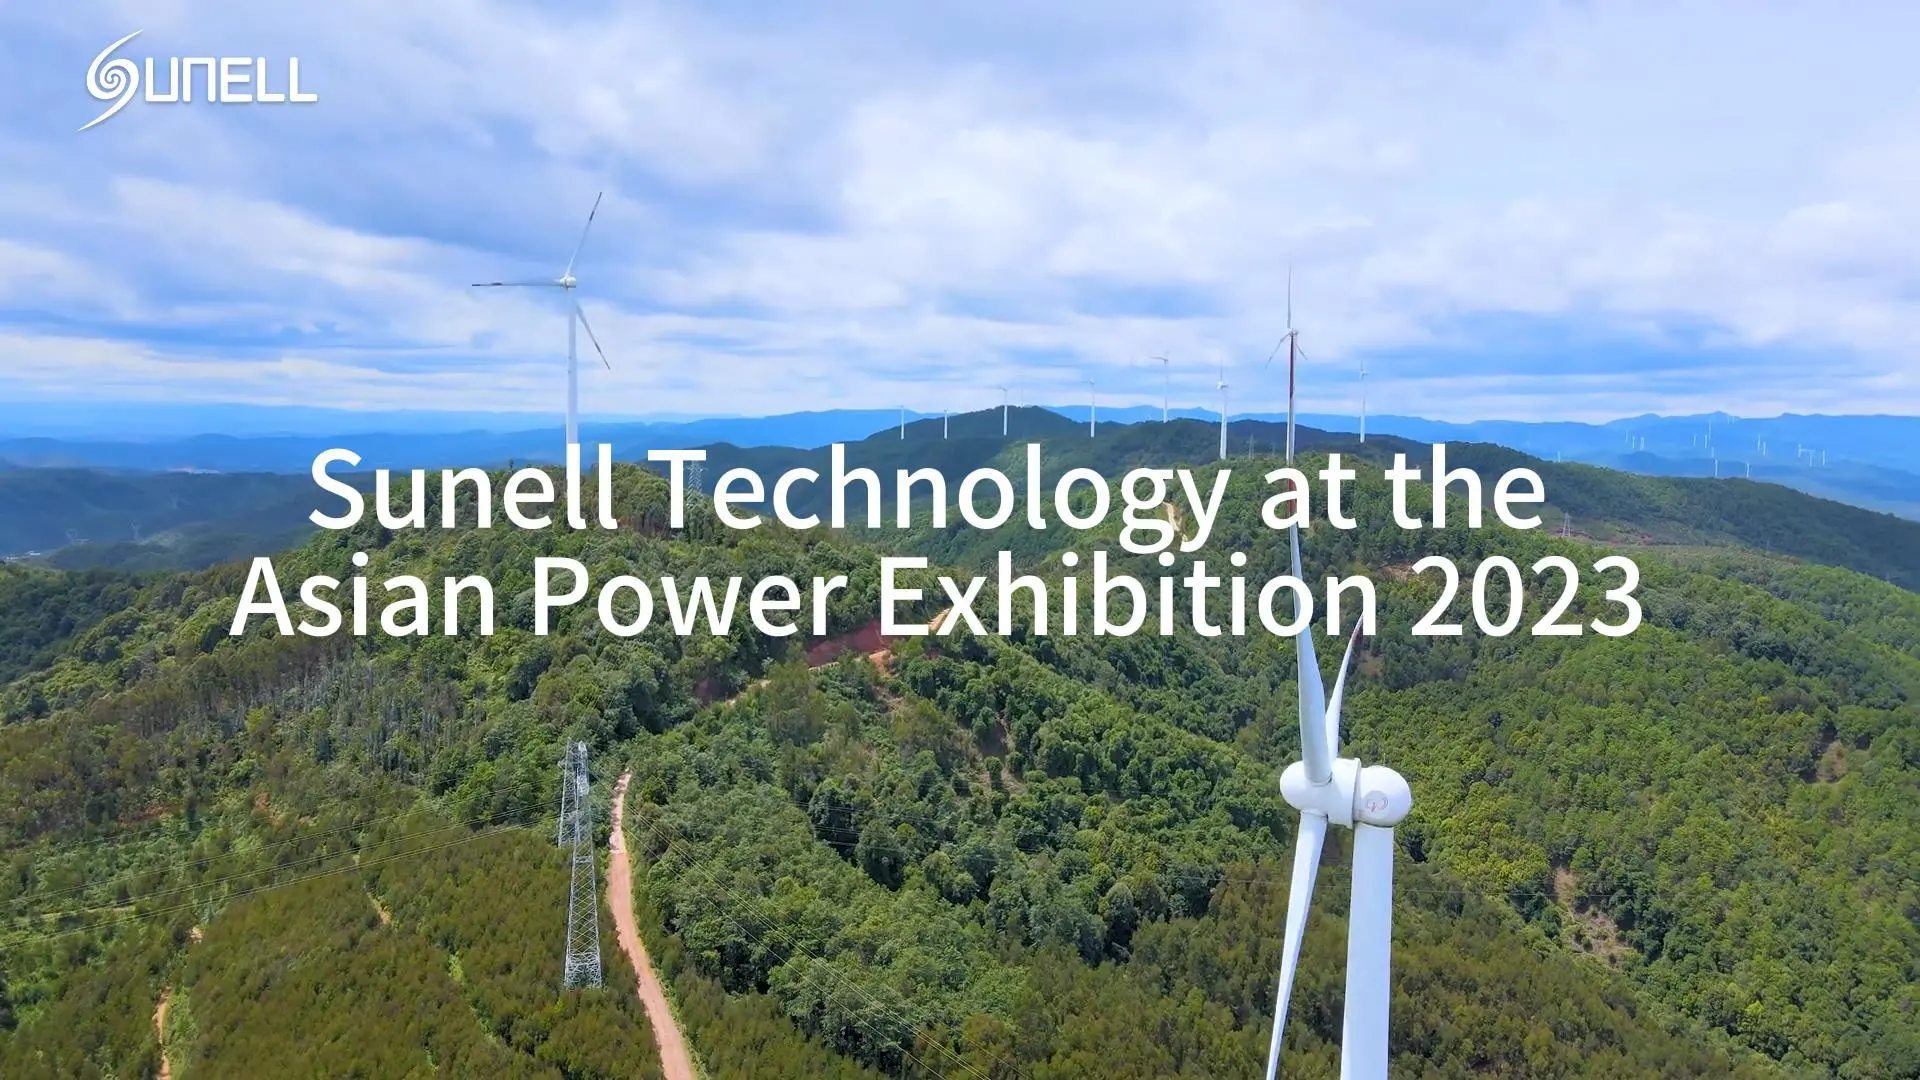 Sunell Technology at the Asian Power Exhibition 2023